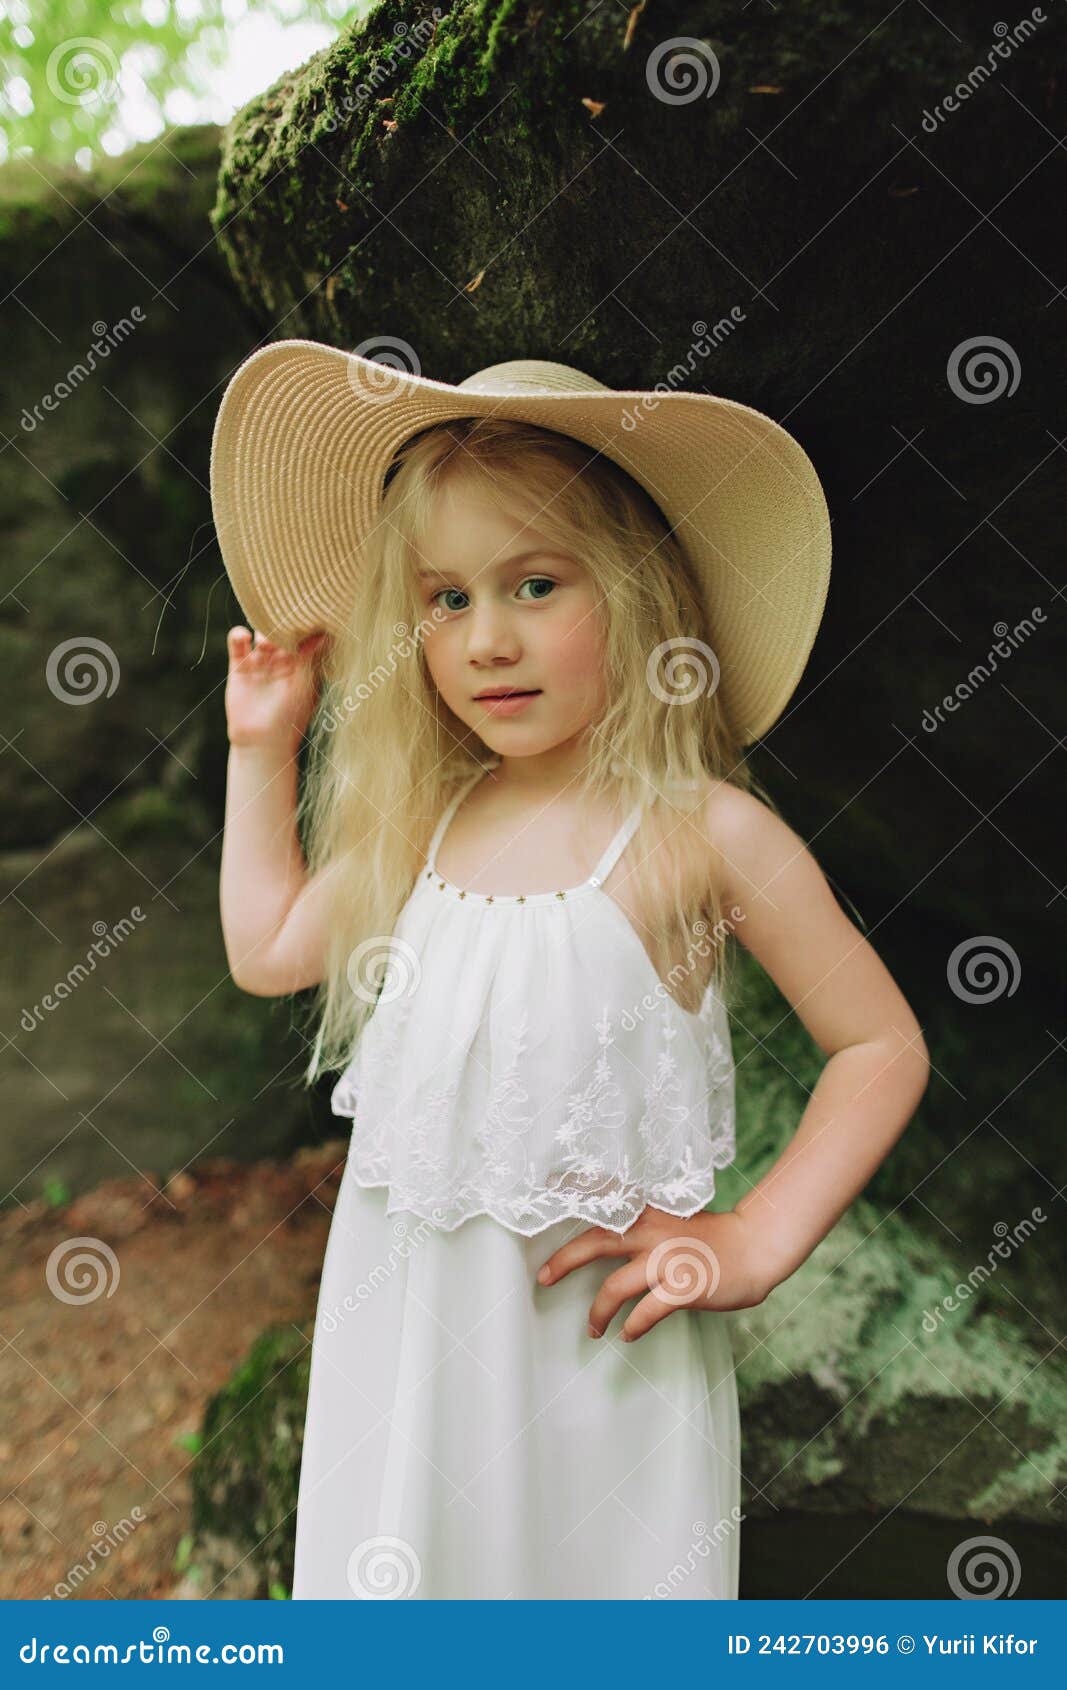 Ukrainian 7 Year Old Girl with White Hair Like an Angel Walking in the  Woods on the Rocks Stock Photo - Image of european, person: 242703996